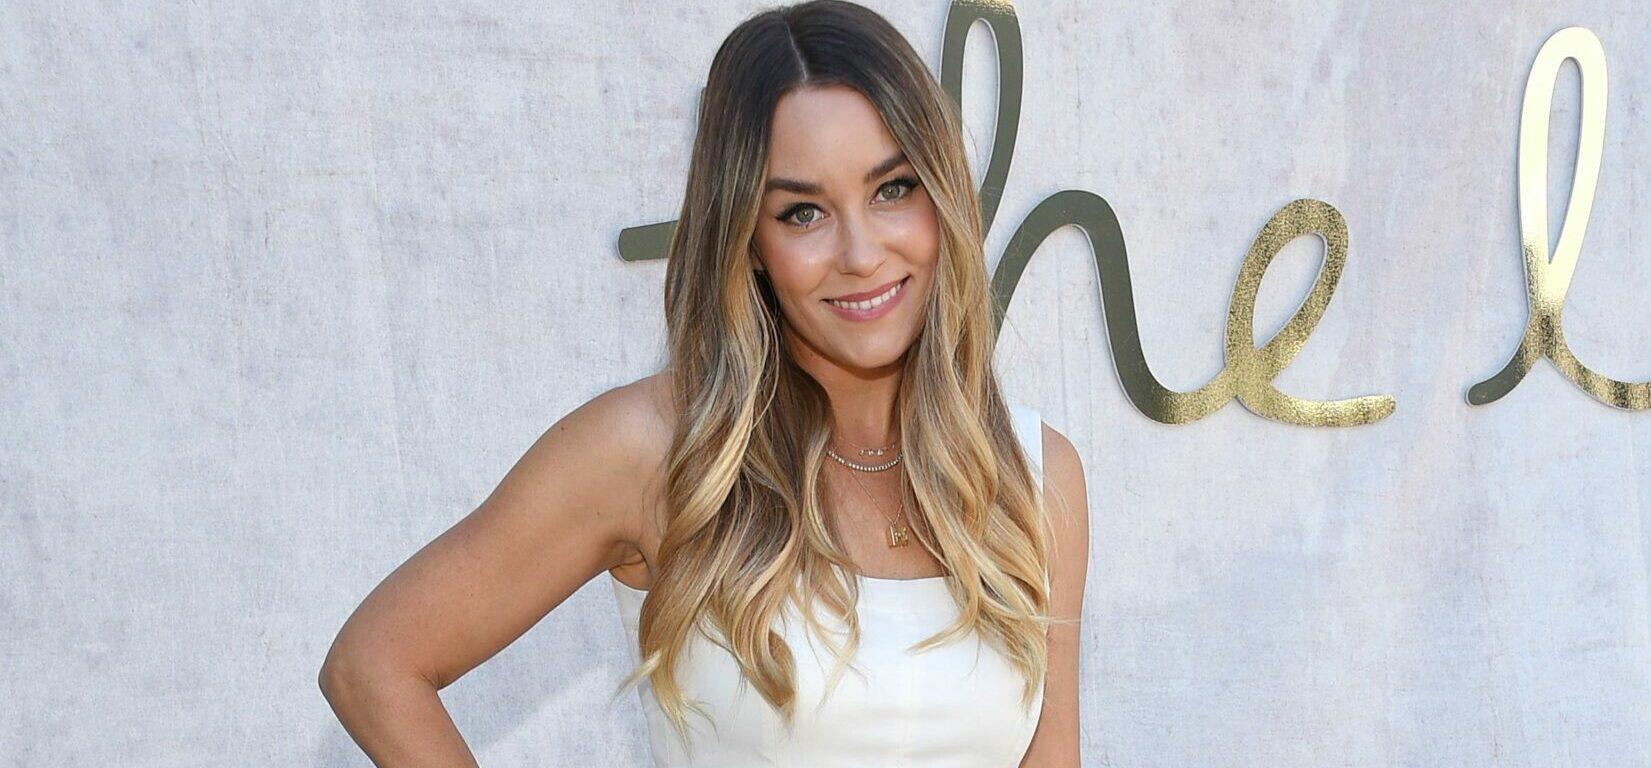 Lauren Conrad Says She's 'Done' With The Reality TV Life